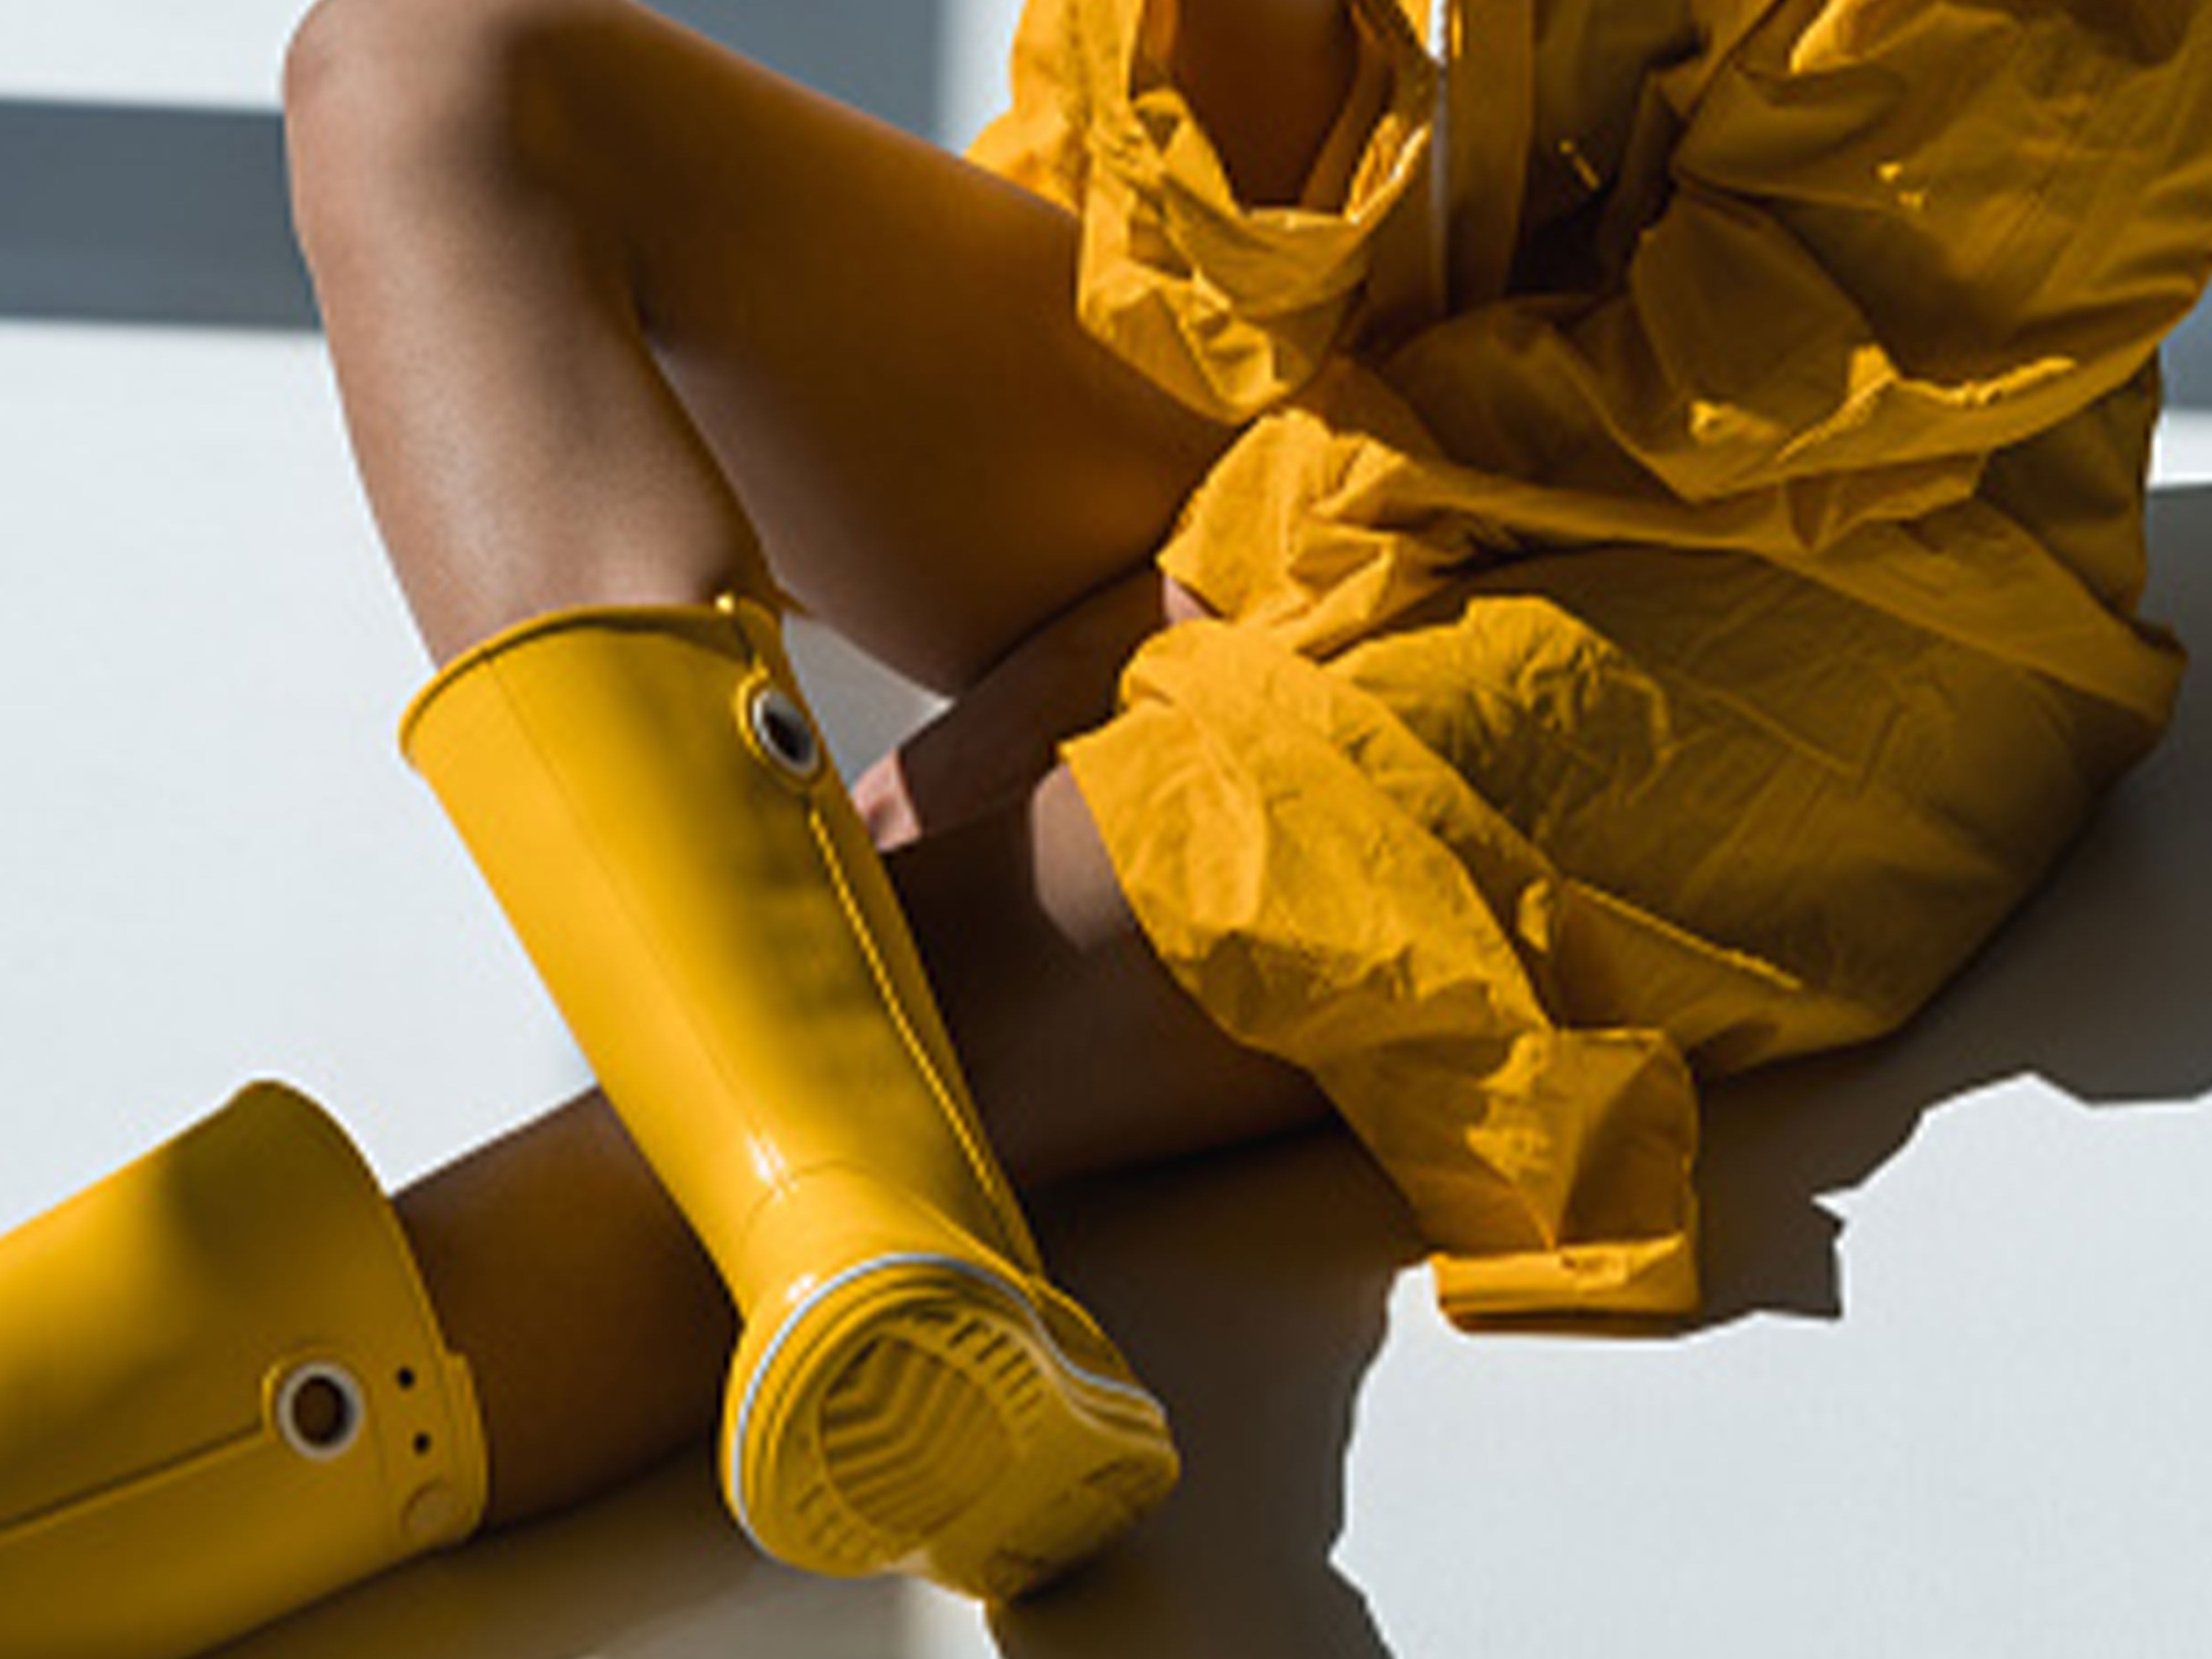 Keep It Cute With These Chic Rain Boots For Gloomy Days